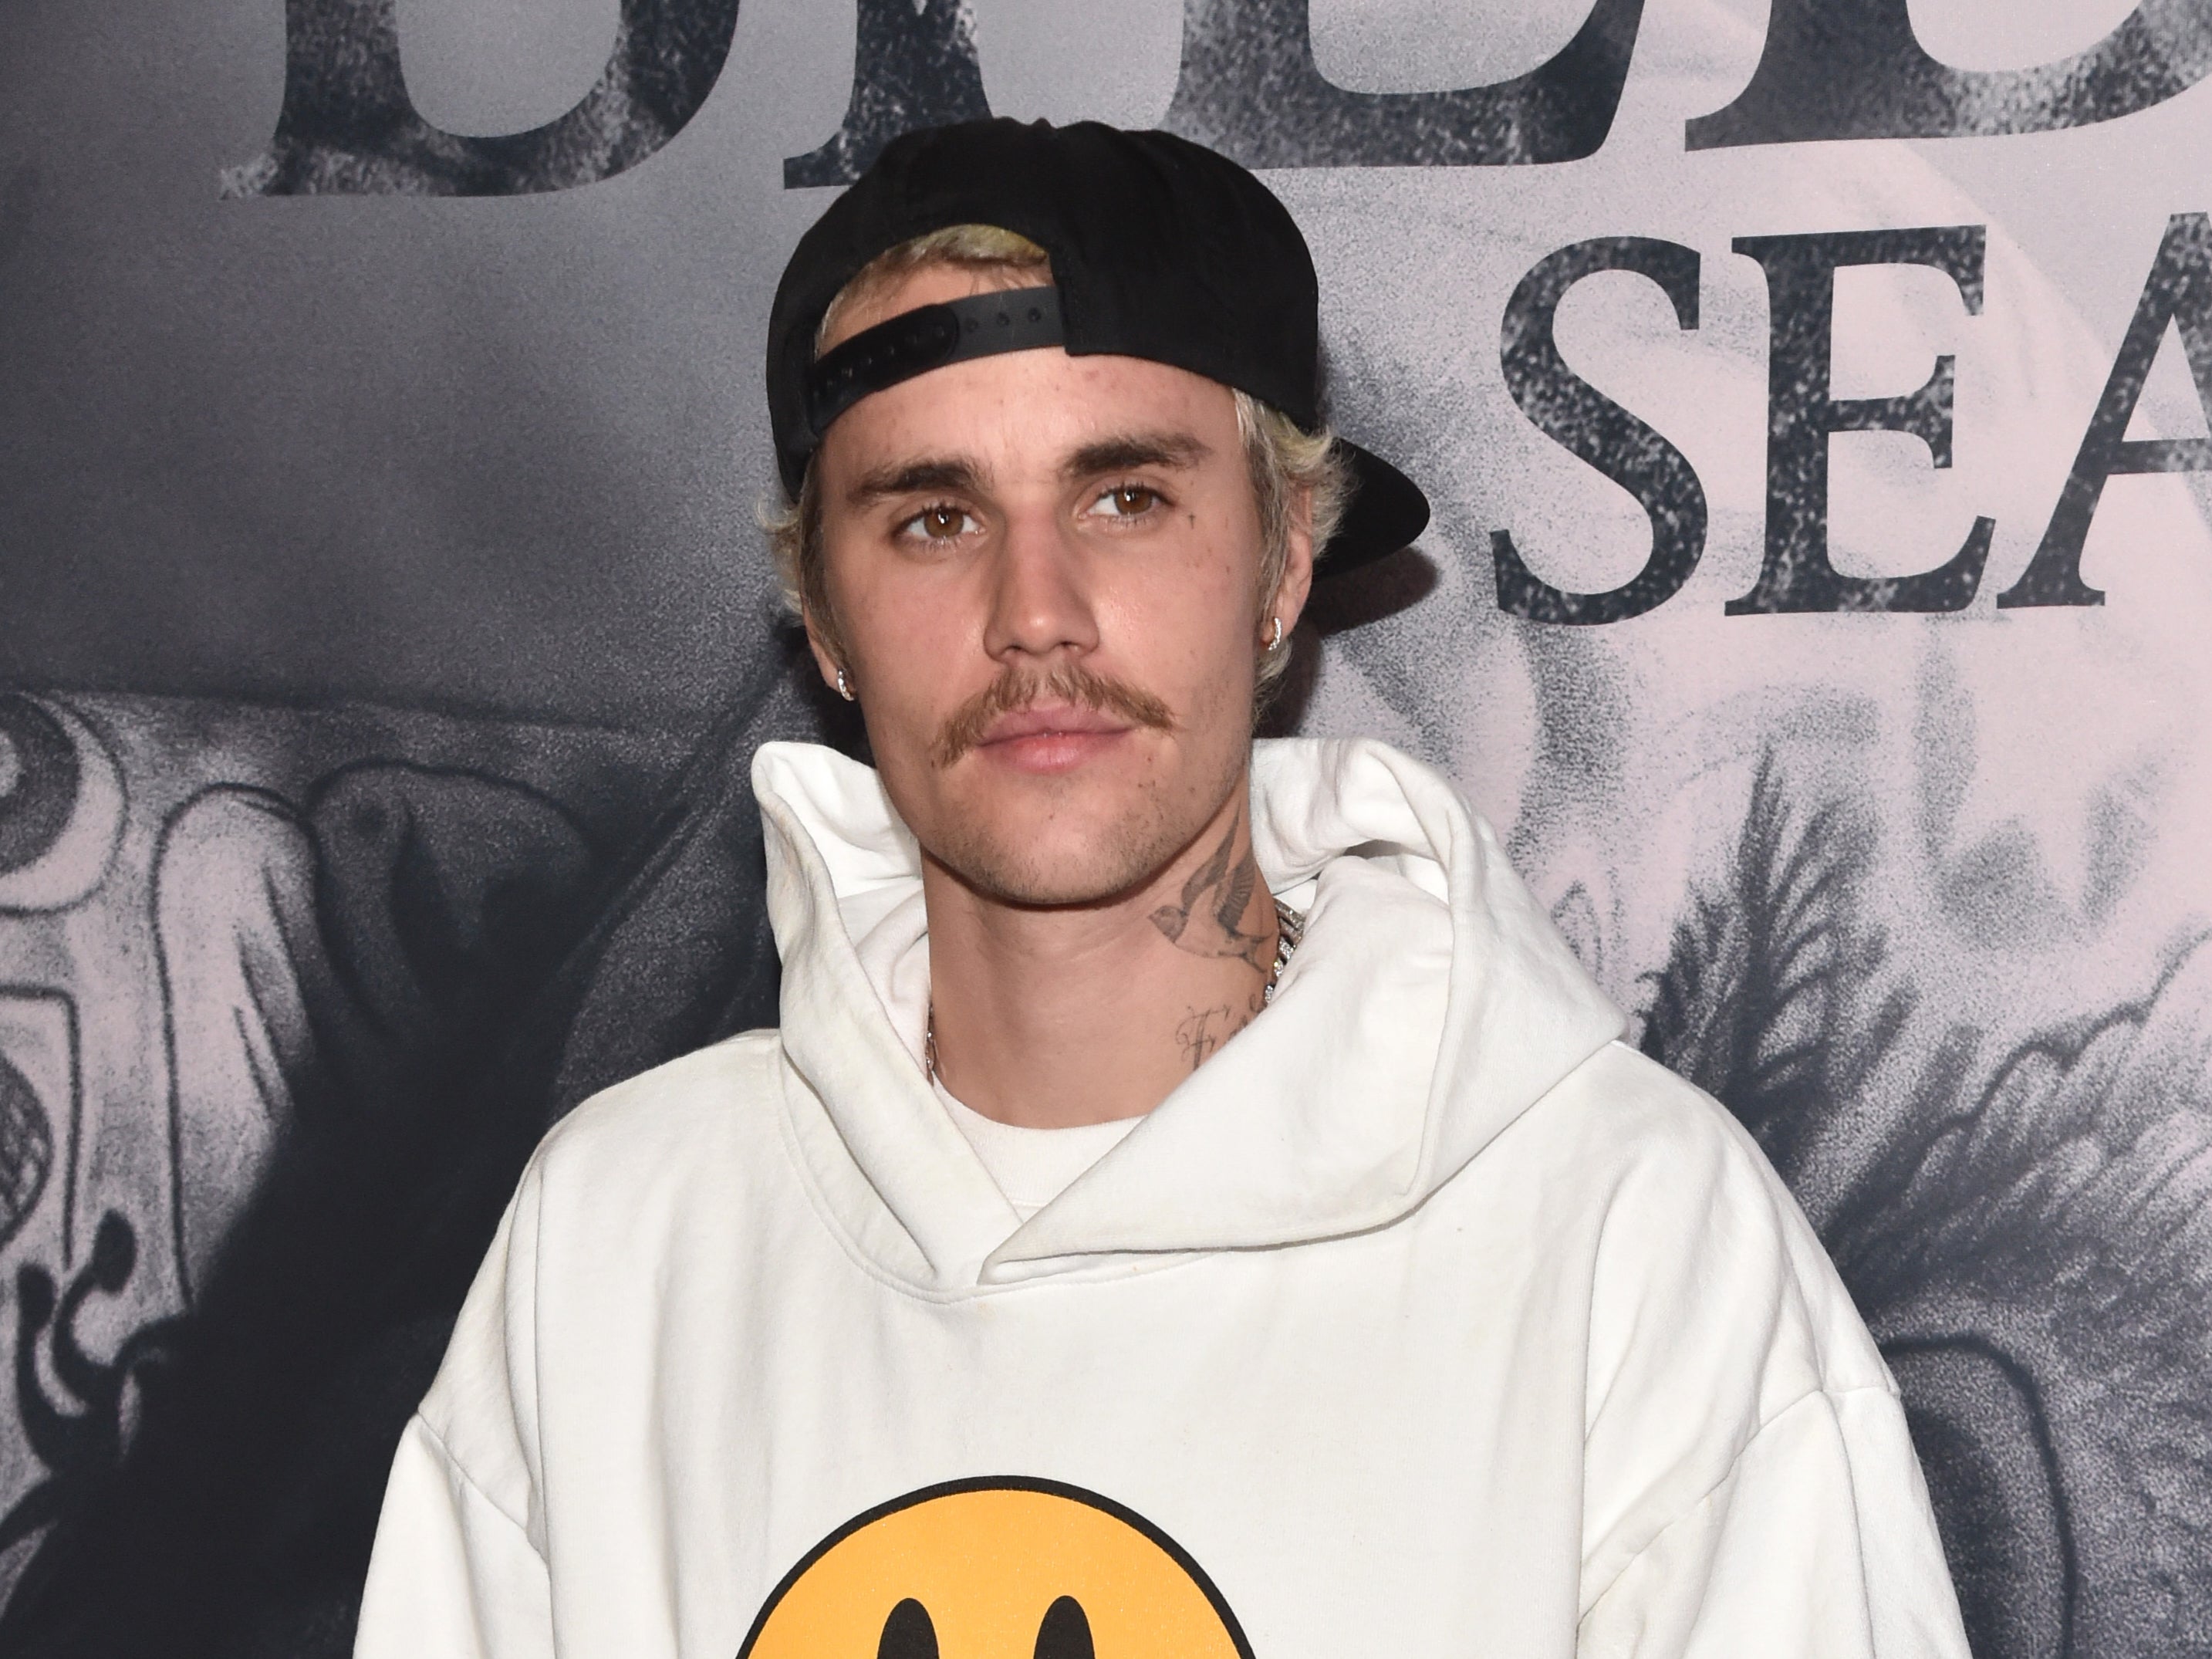 Justin Bieber attends the premiere of the documentary ‘Justin Bieber: Seasons’ on 27 January 2020 in Los Angeles, California